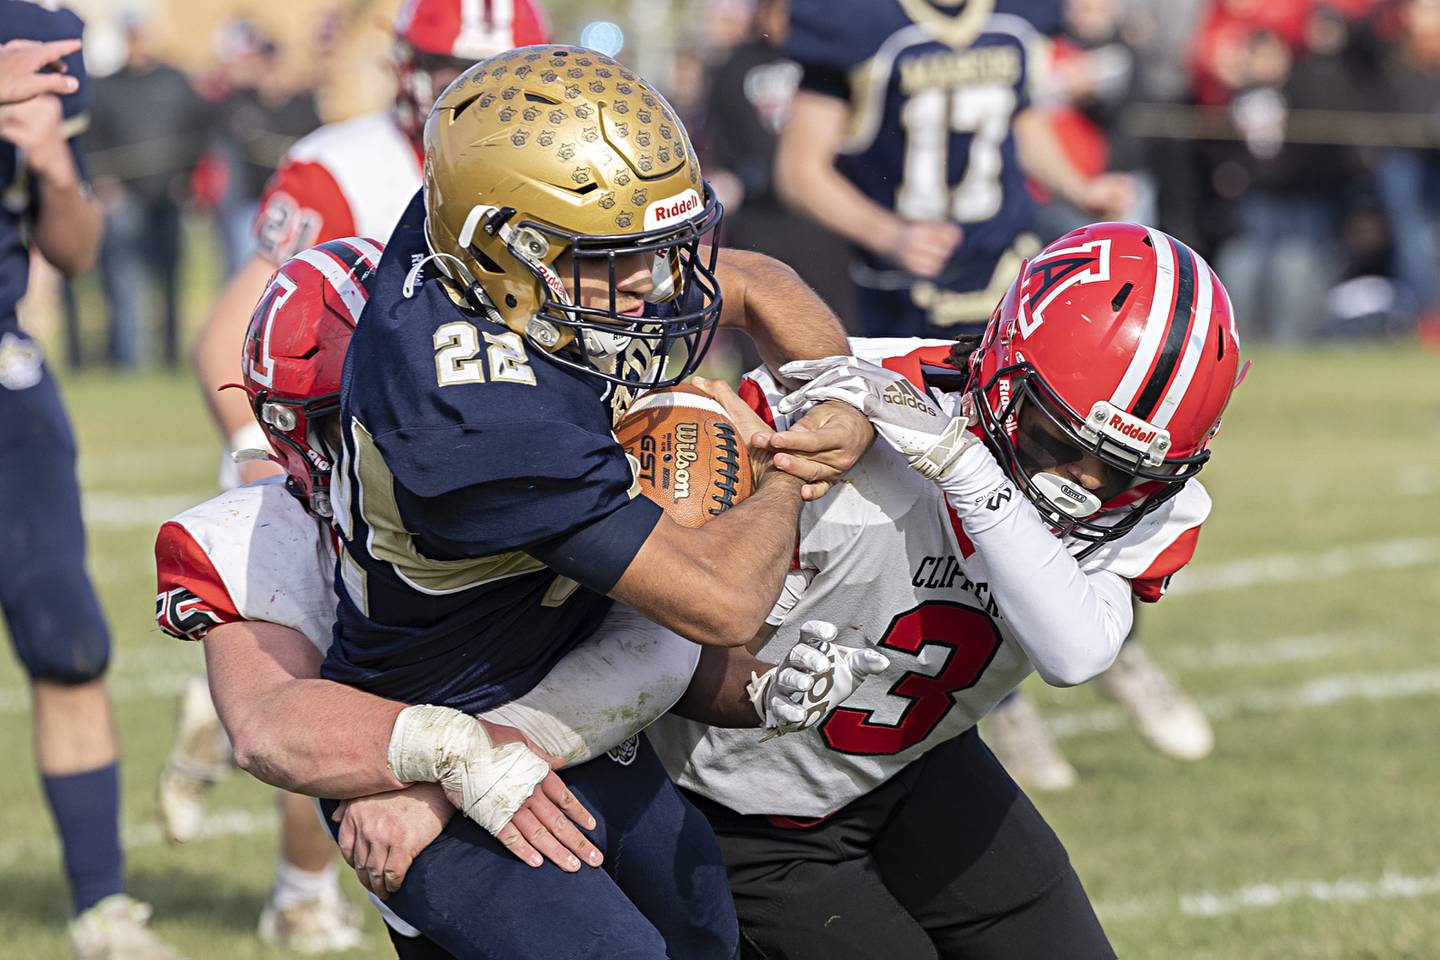 Polo’s Delo Fernandez is tackled by Landon Montavon (left) and Cody Winn Saturday, Nov. 11, 2023 during a semifinal 8-man football game in Polo.